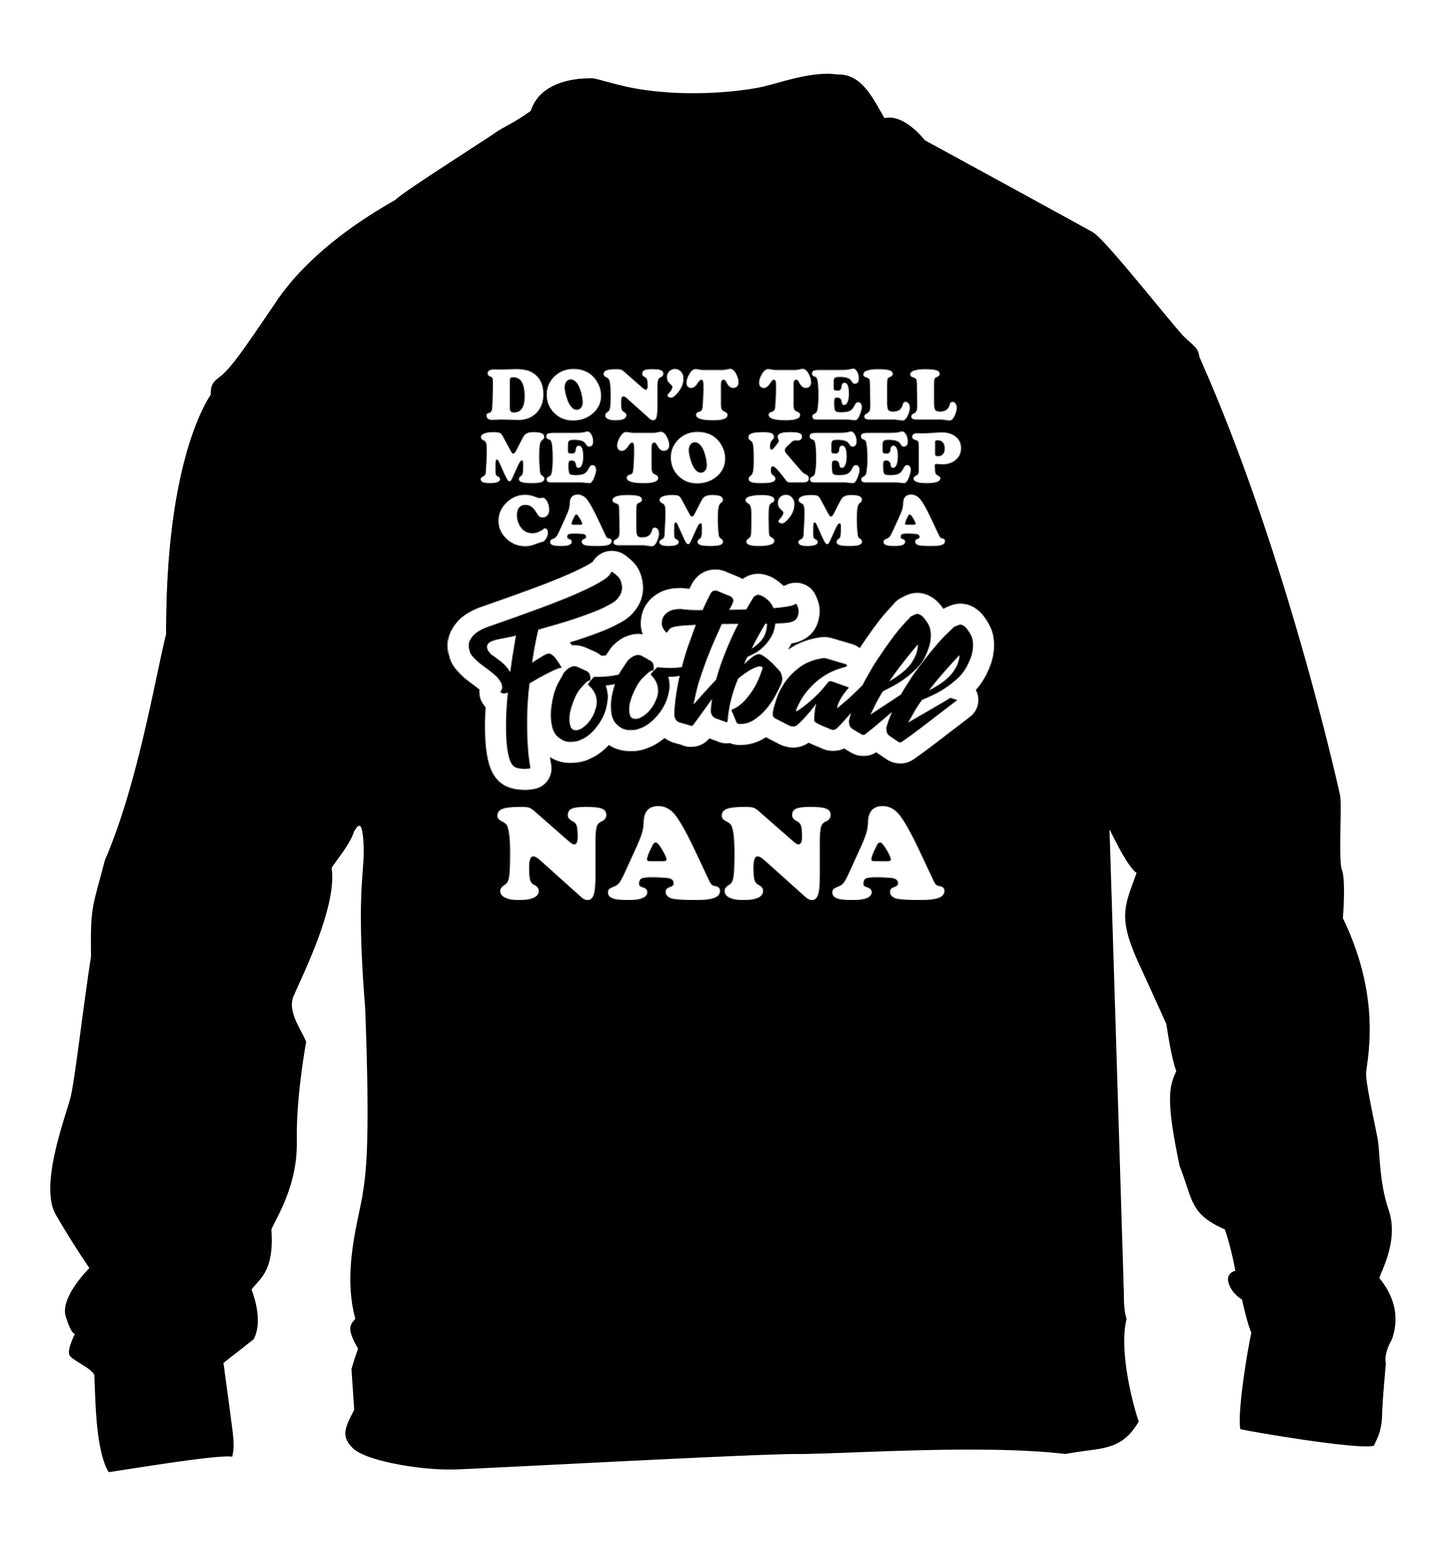 Don't tell me to keep calm I'm a football nana children's black sweater 12-14 Years